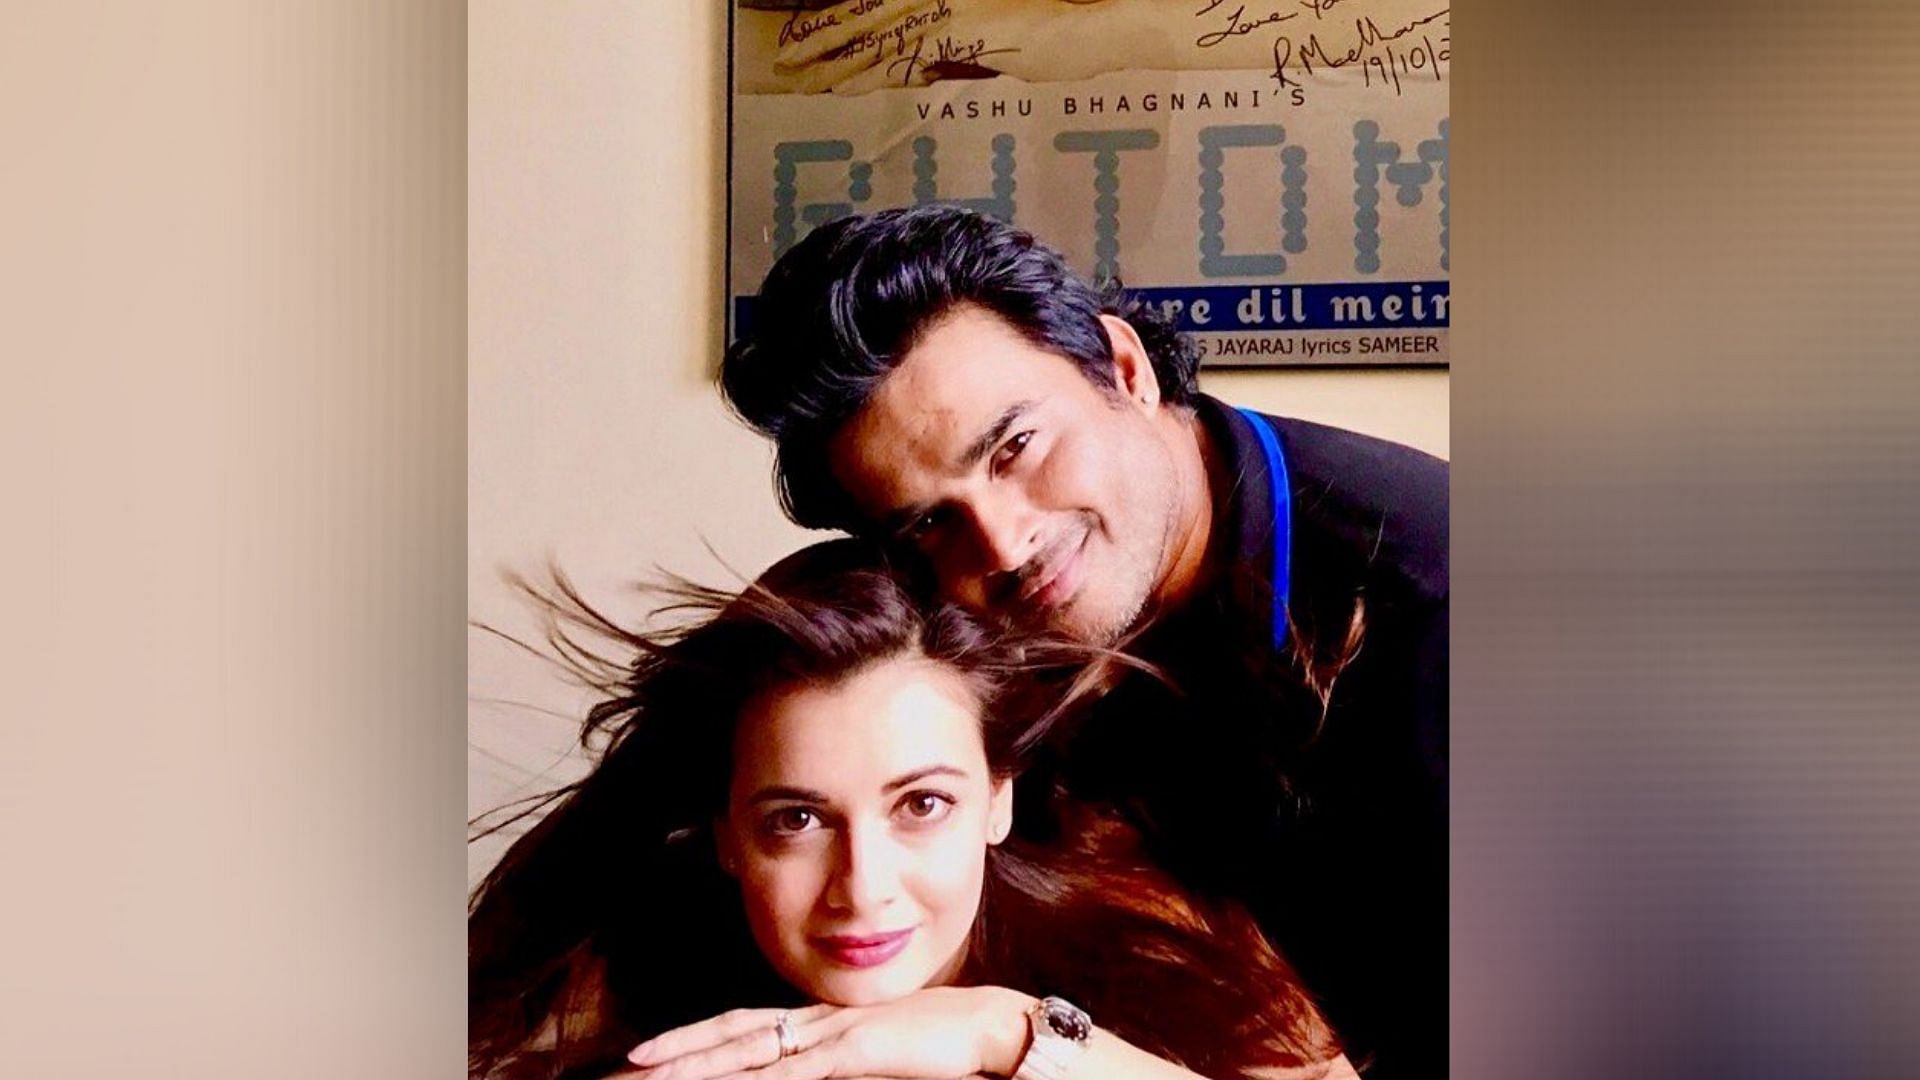 Madhavan and Dia starred in the 2001 film <i>Rehnaa Hai Terre Dil Mein.</i>